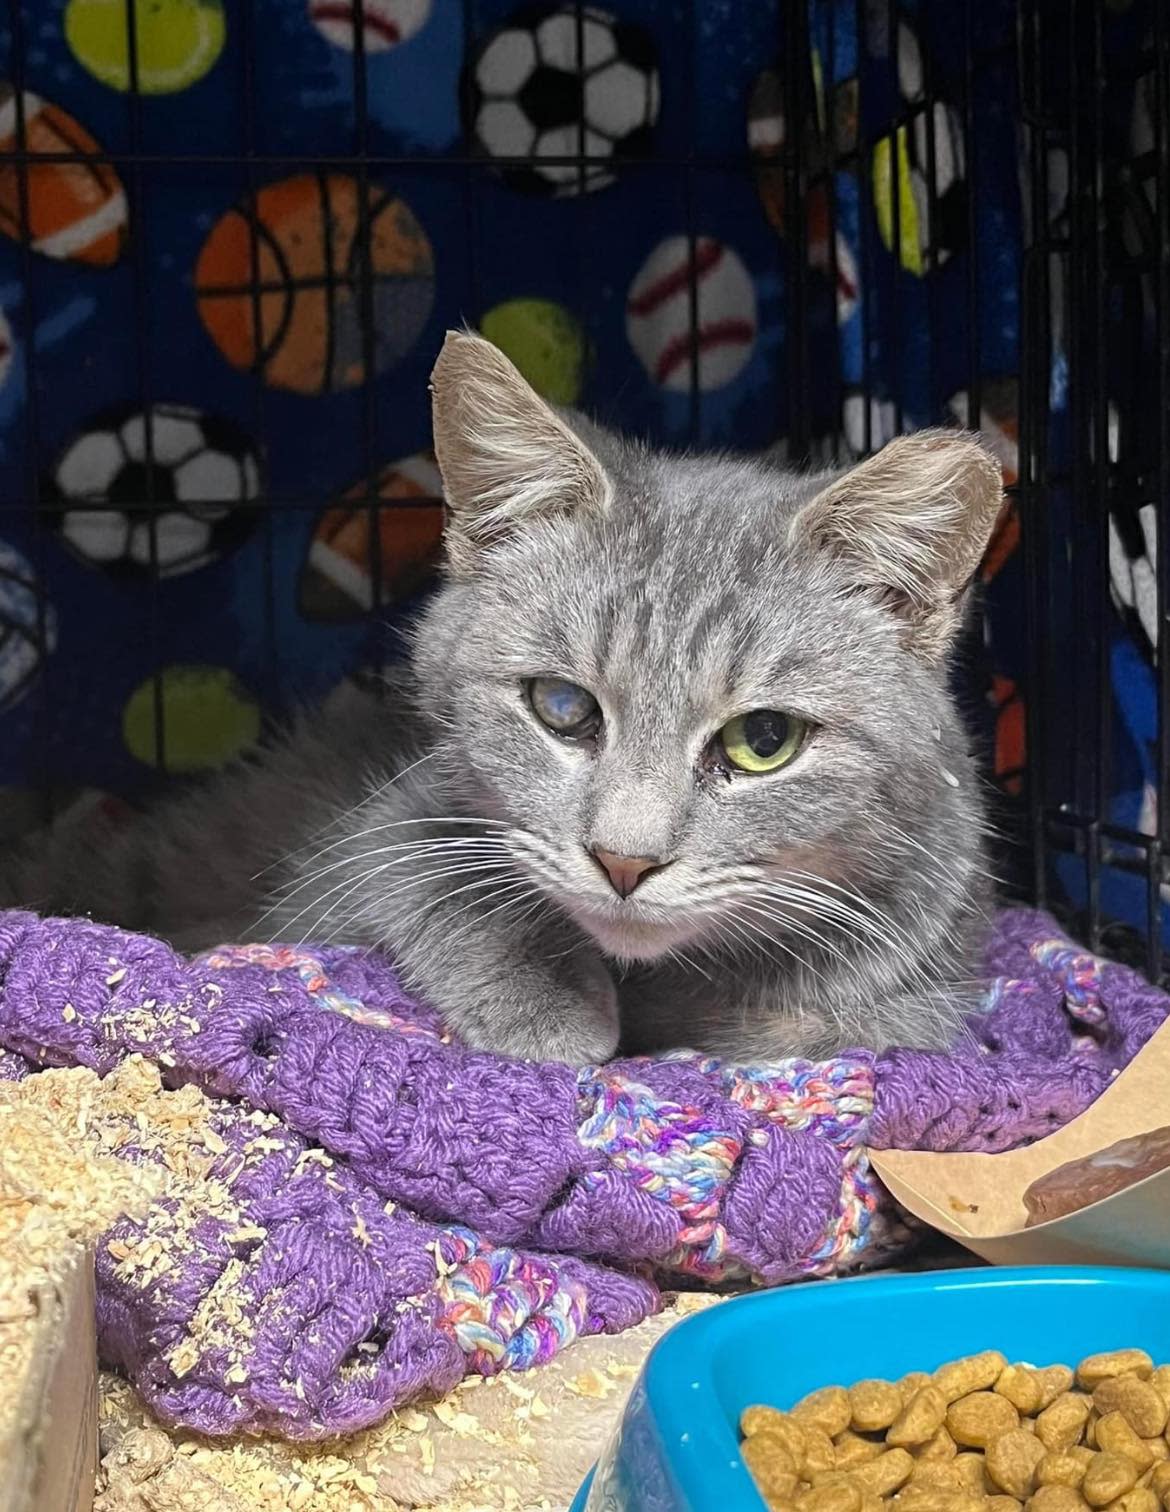 Mojito, a friendly cat found in a feral colony during a TNR project in Cumberland County, is waiting patiently for a rescue to find him a permanent forever home.